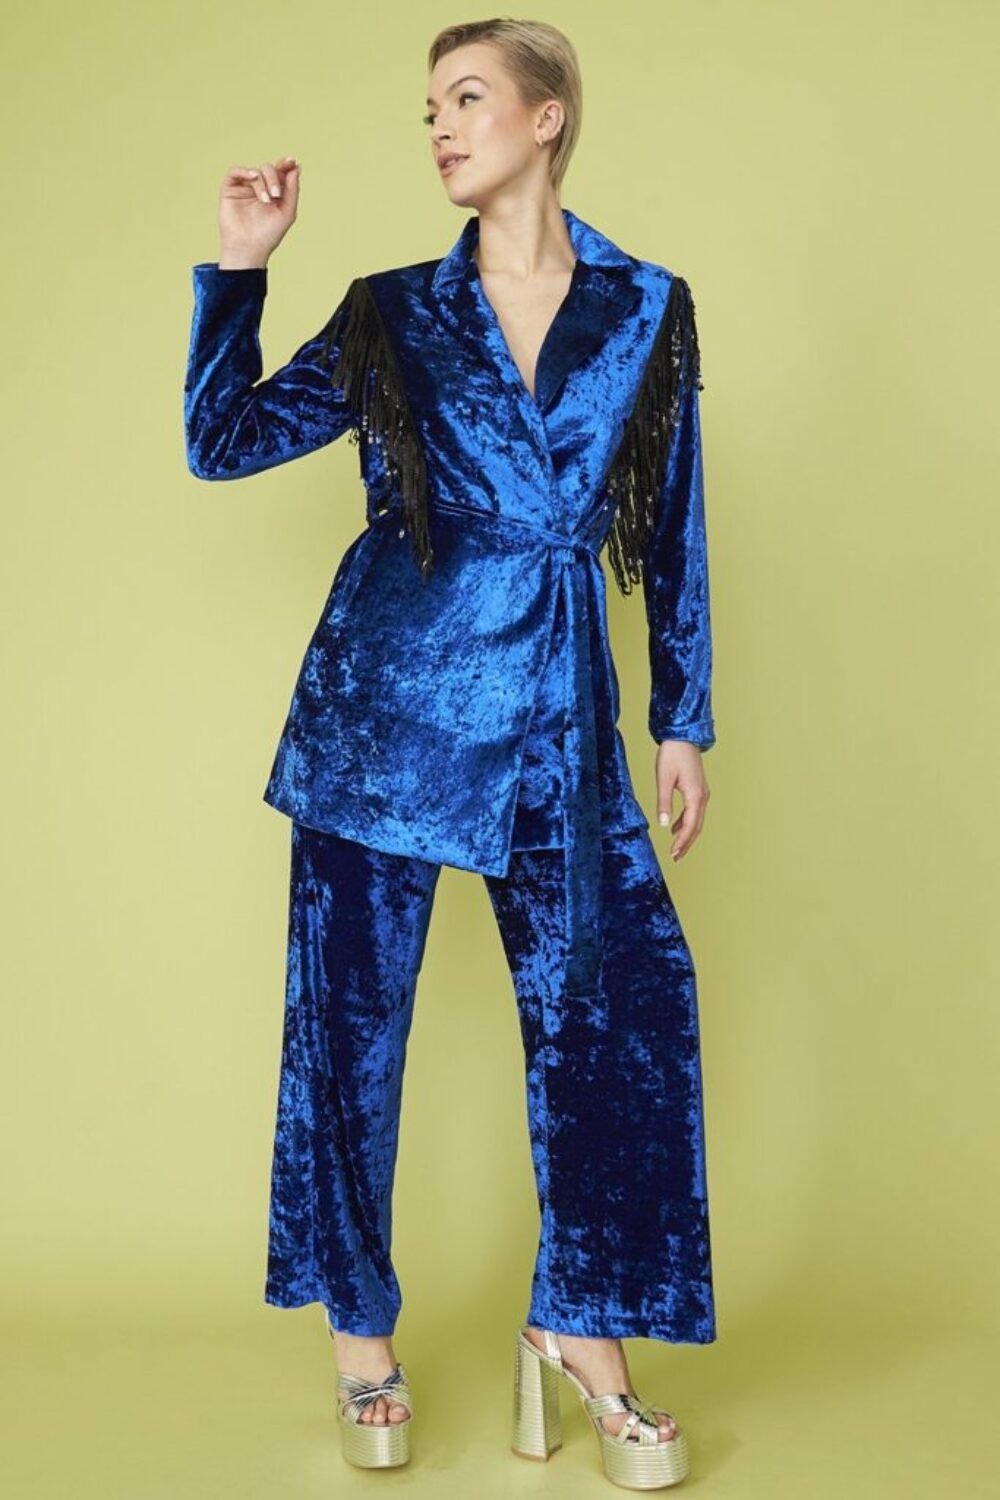 Shop Lux Blue Crushed Velvet Blazer dress with Sequin Tassels and women's luxury and designer clothes at www.lux-apparel.co.uk